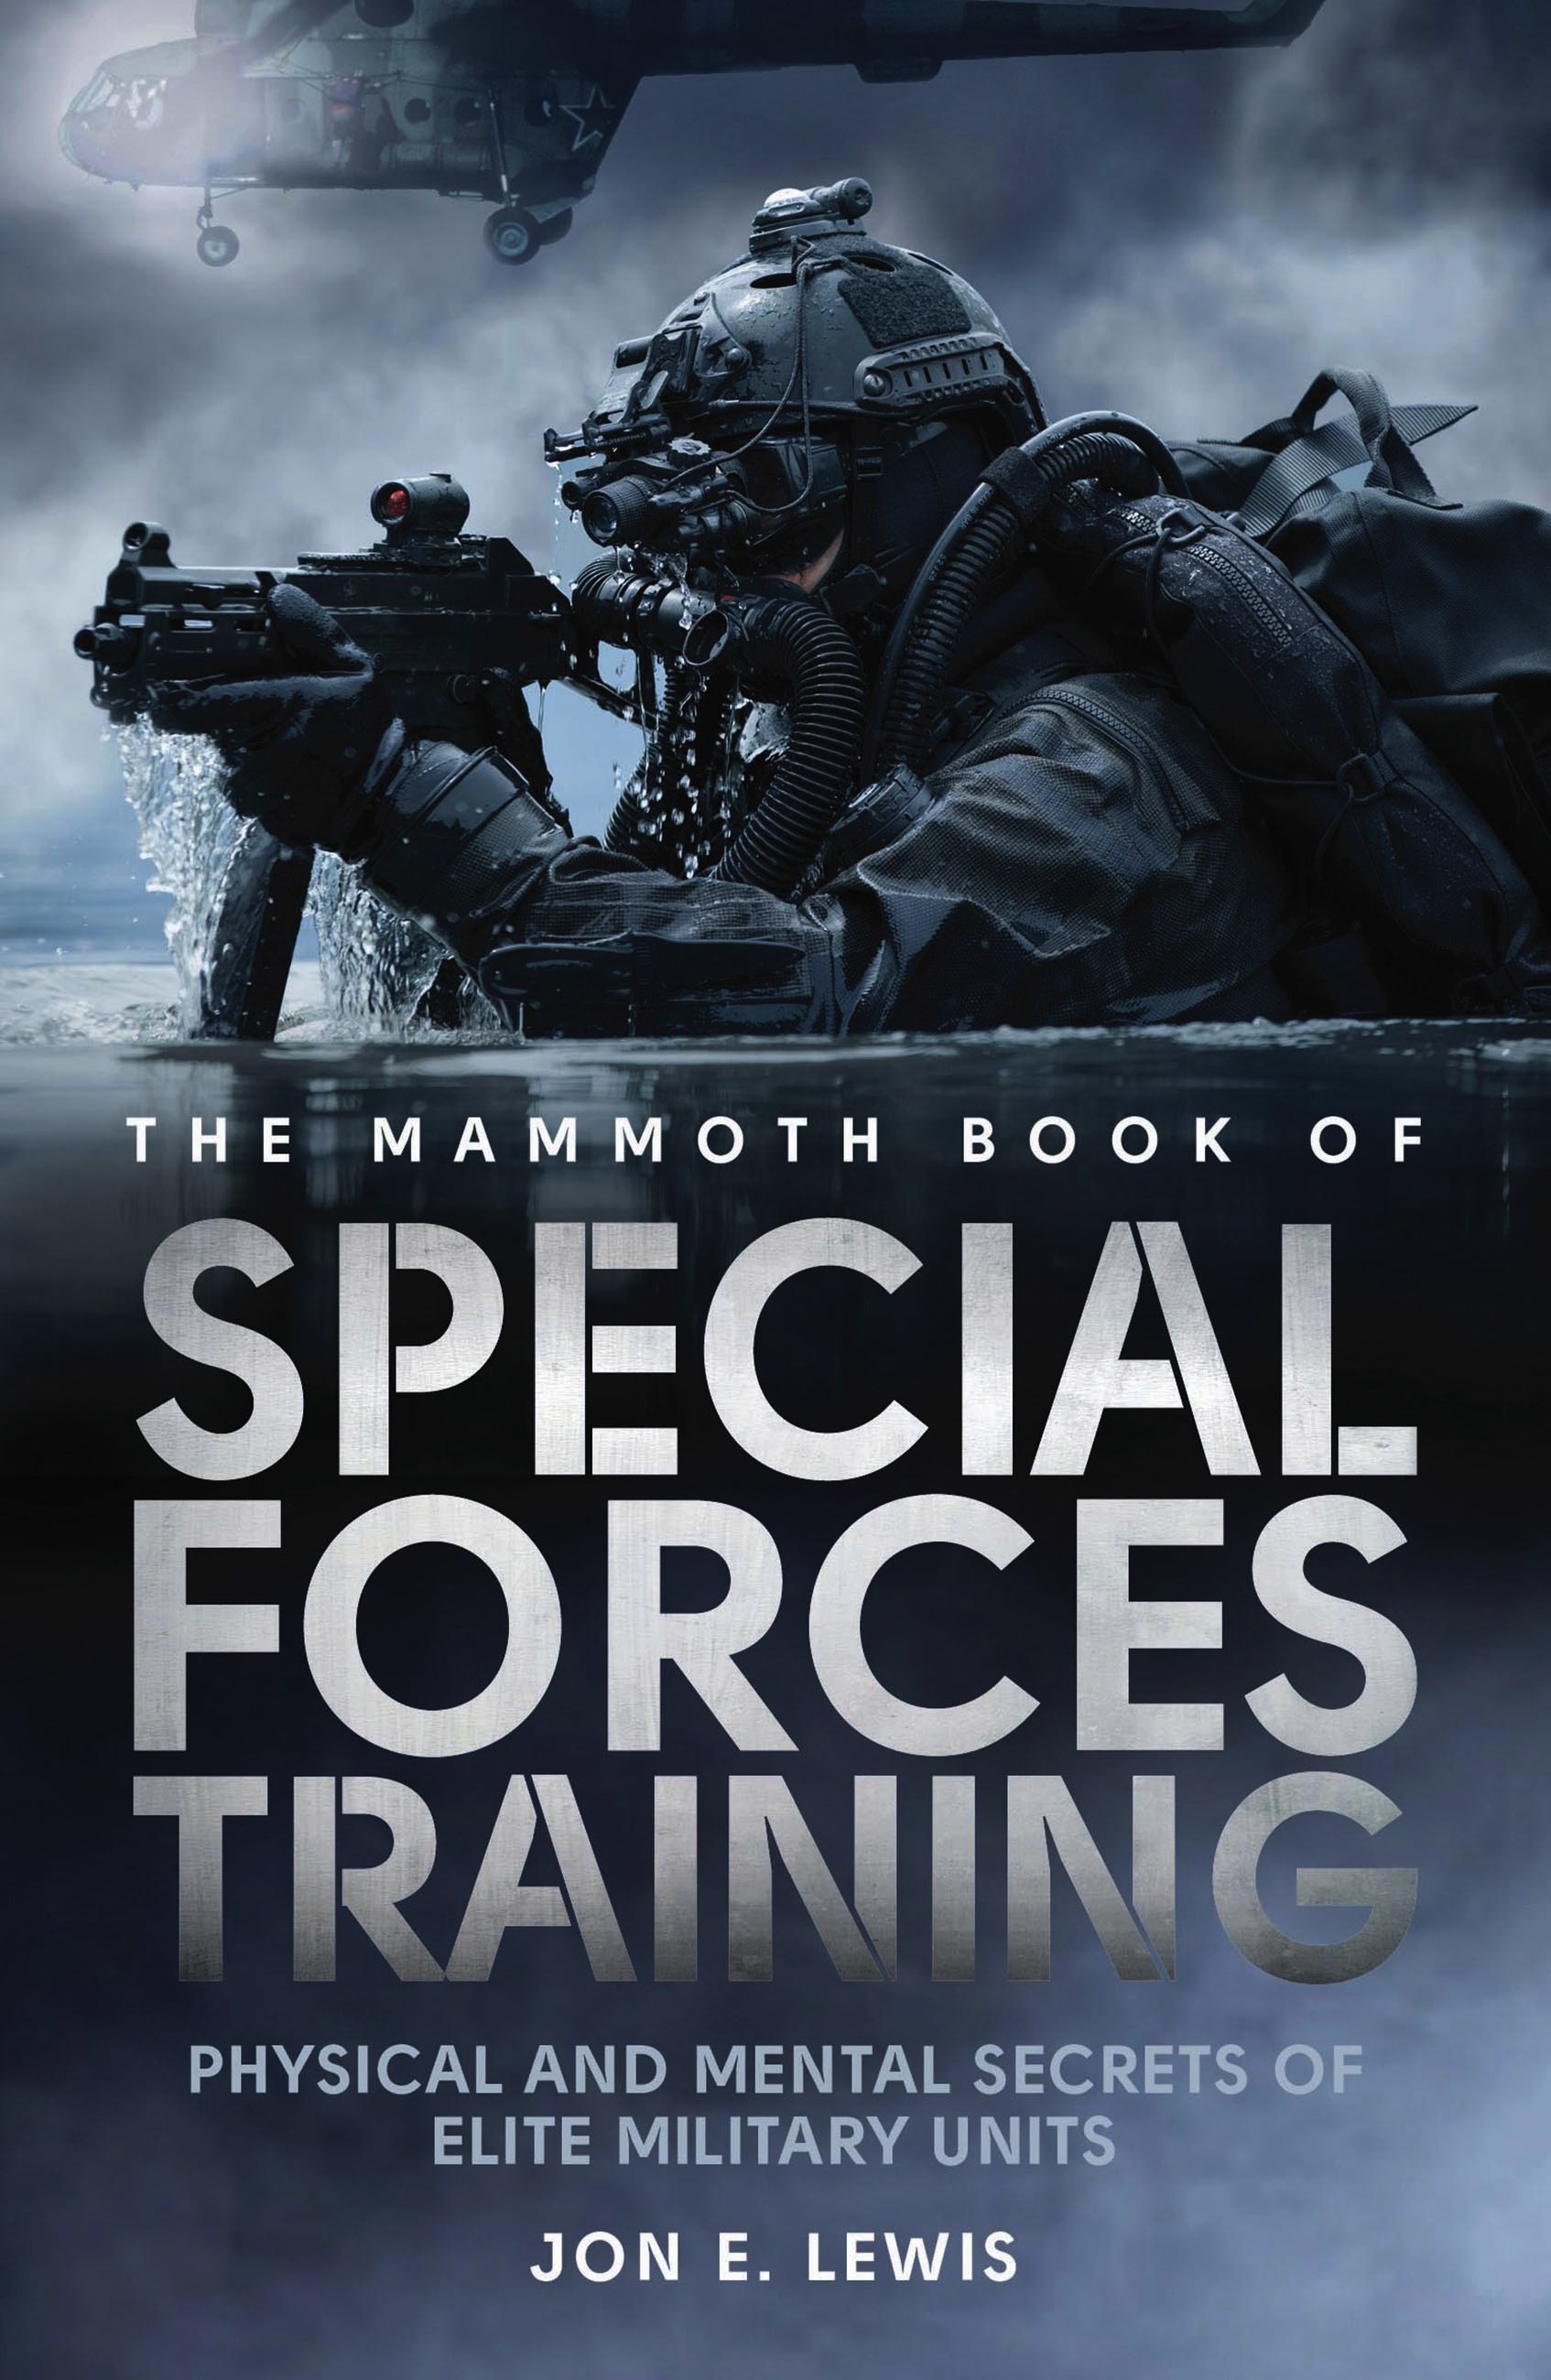 The Mammoth Book of Special Forces Training by Jon E photo